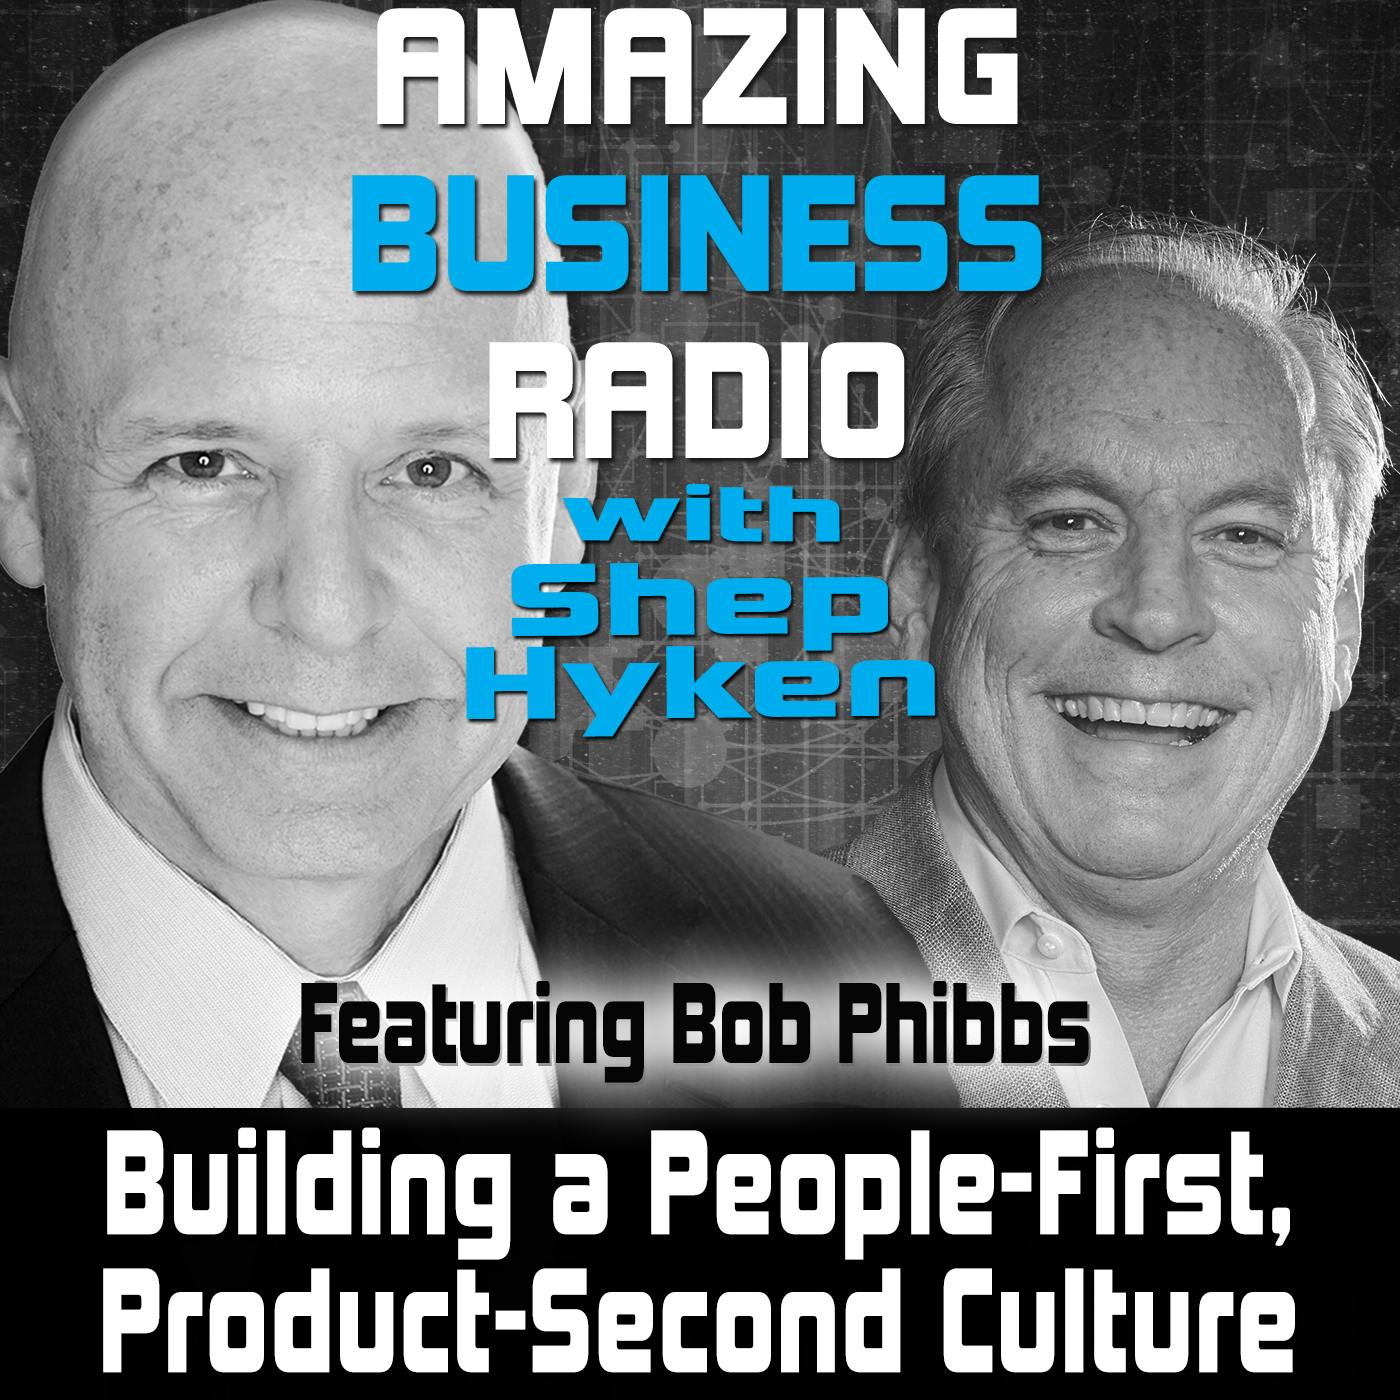 Building a People-First, Product-Second Culture Featuring Bob Phibbs